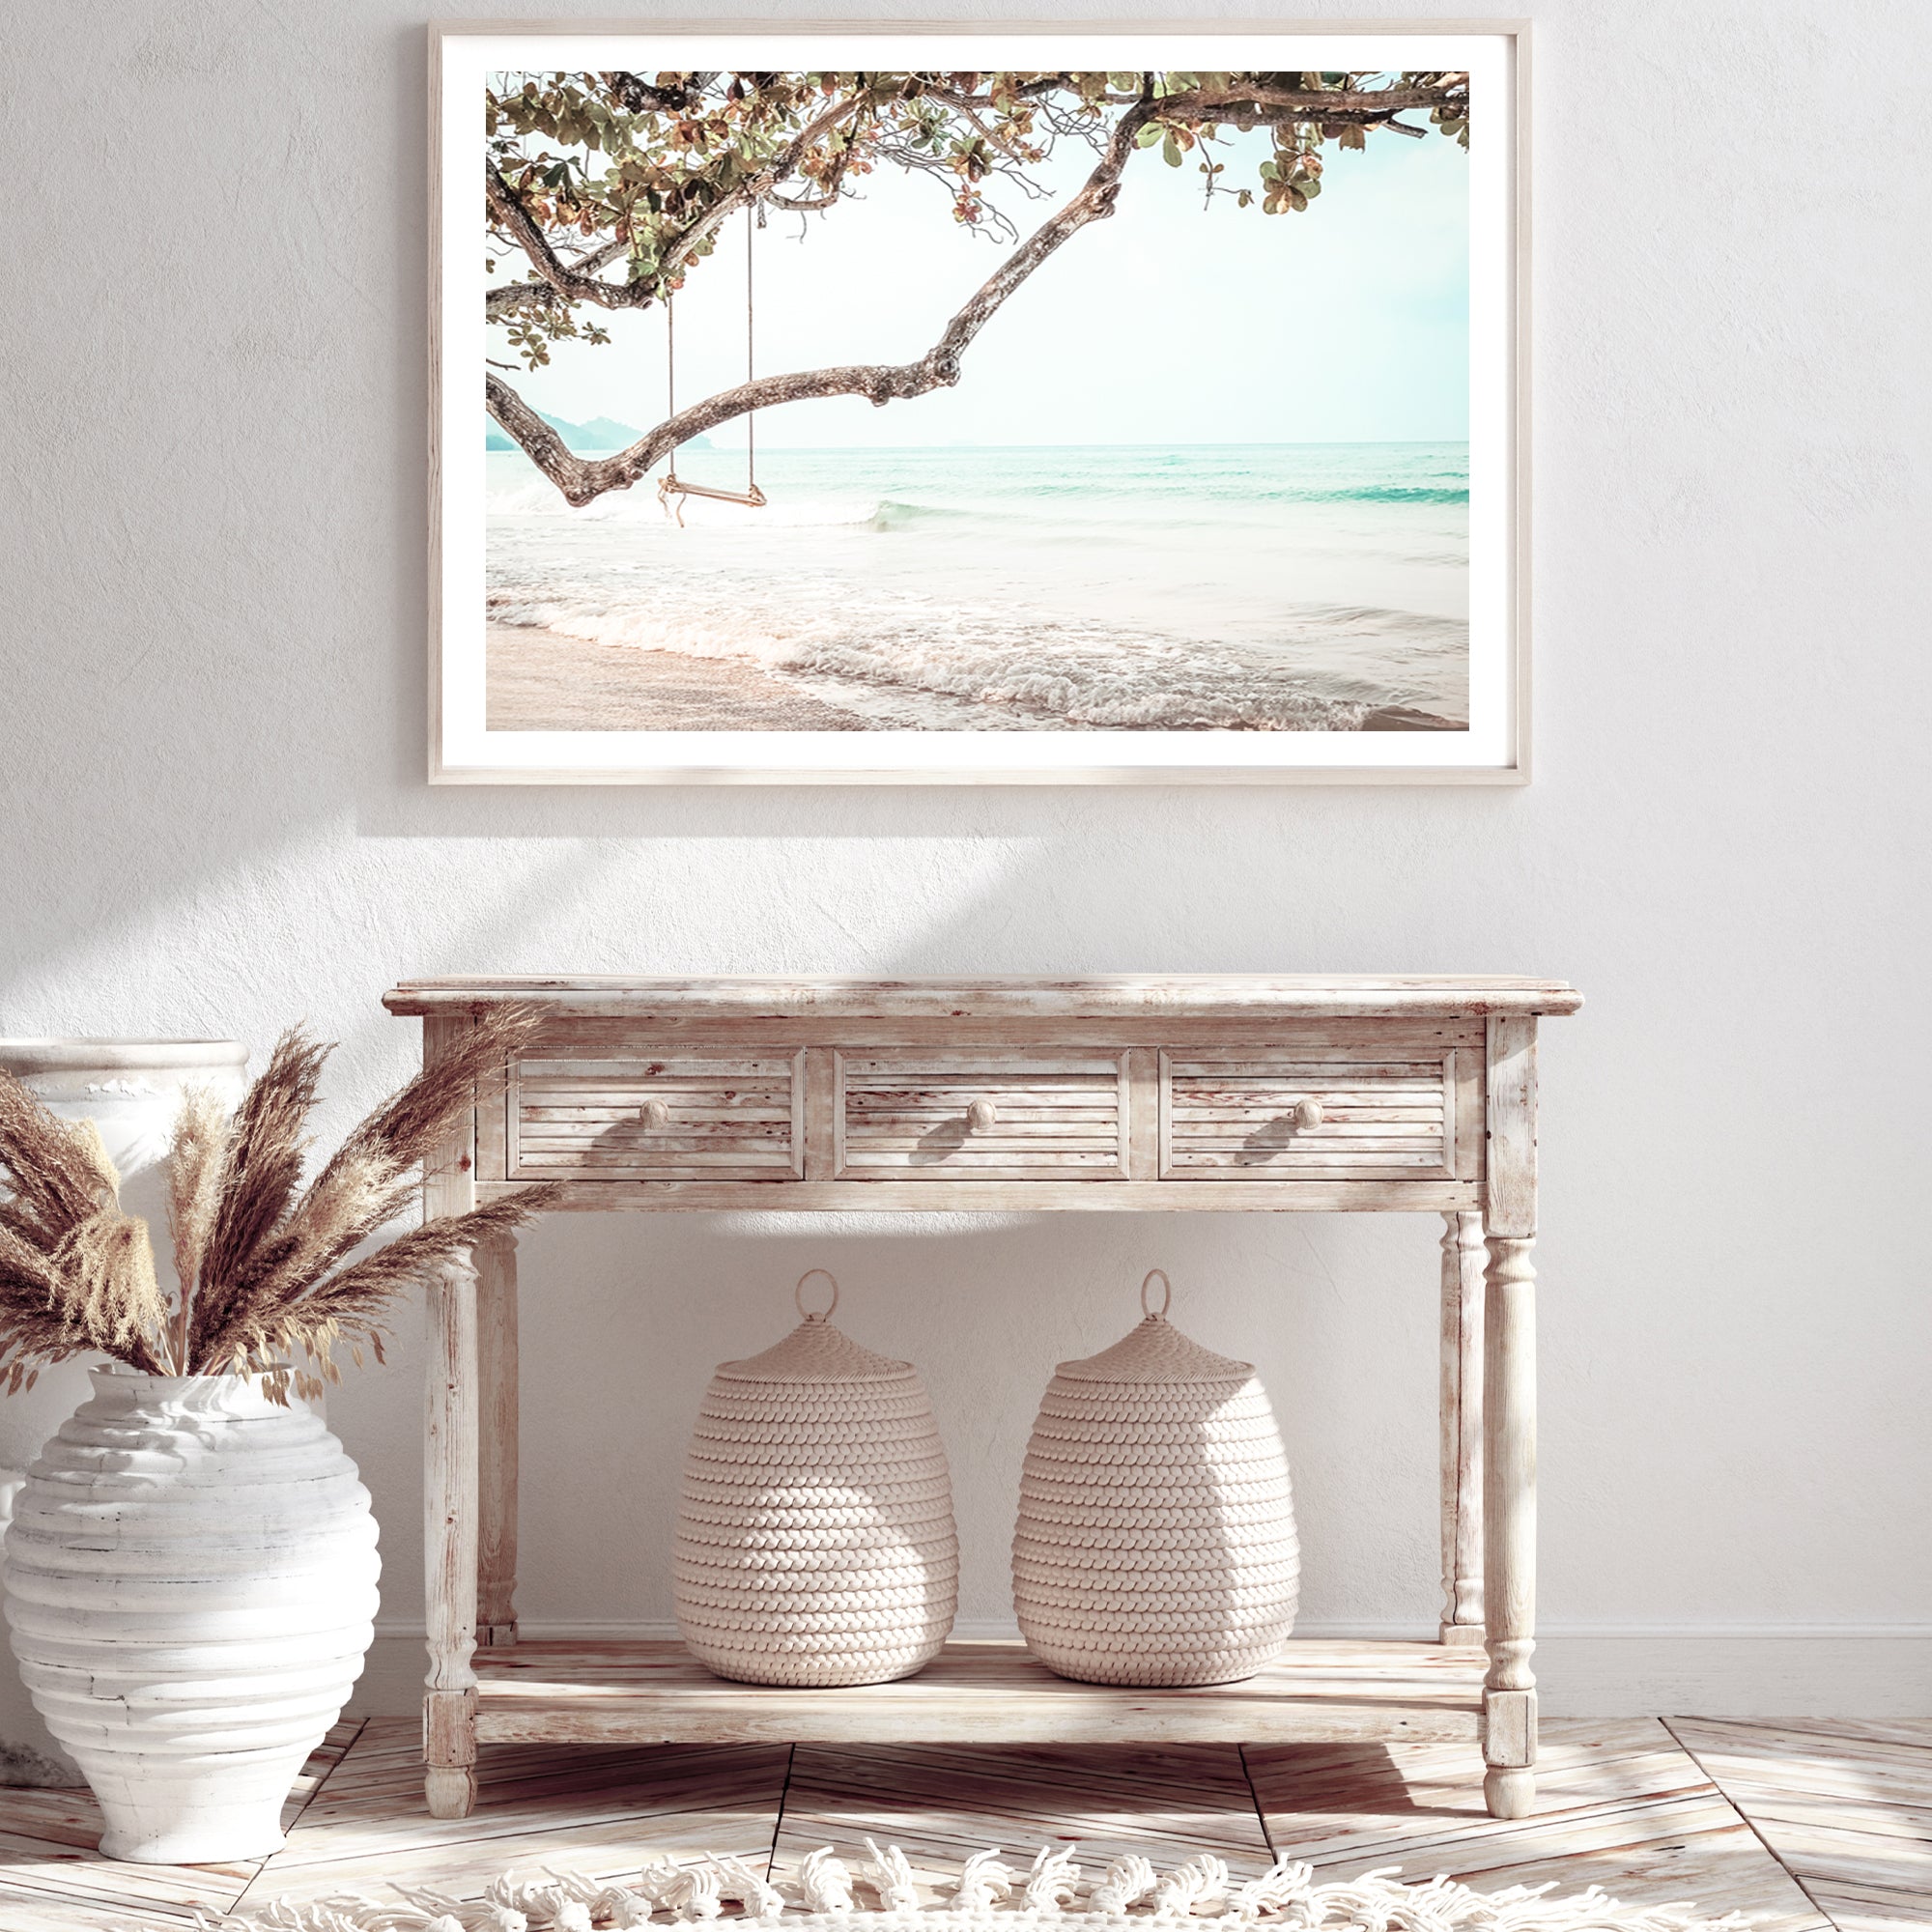 A photo wall art print of a beachside swing, available in print and canvas.